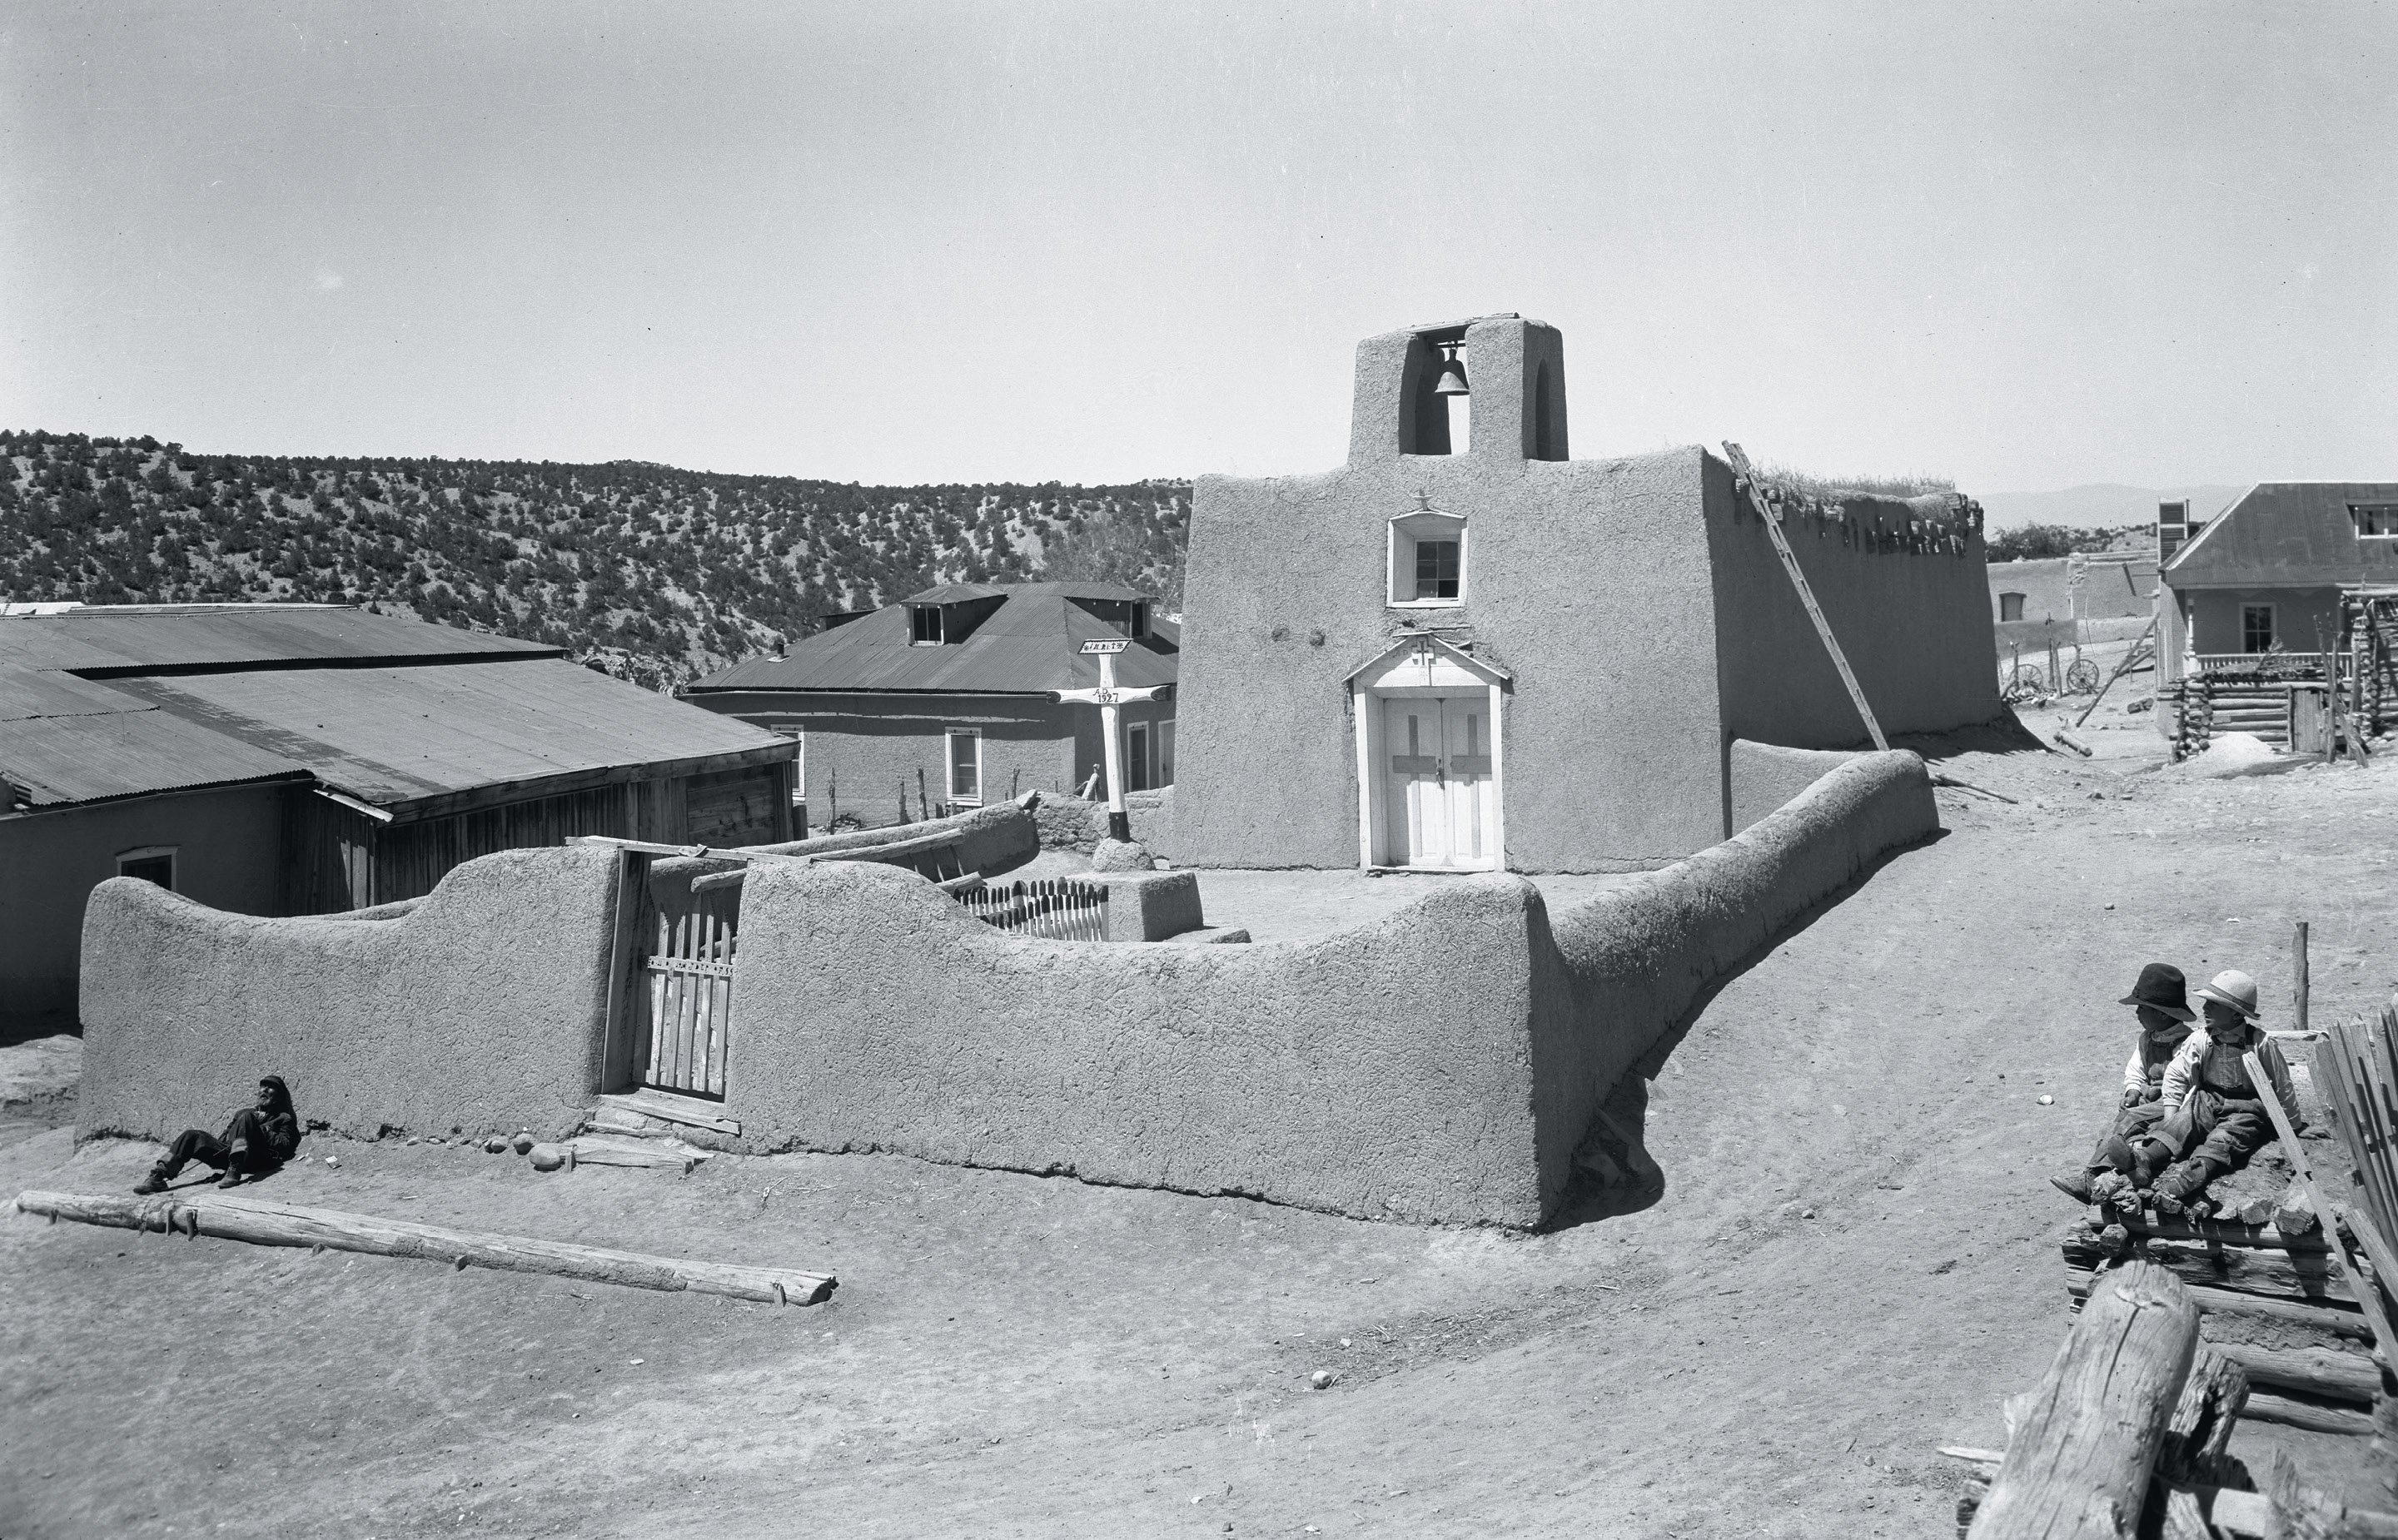 Image of old adobe mission church in New Mexico